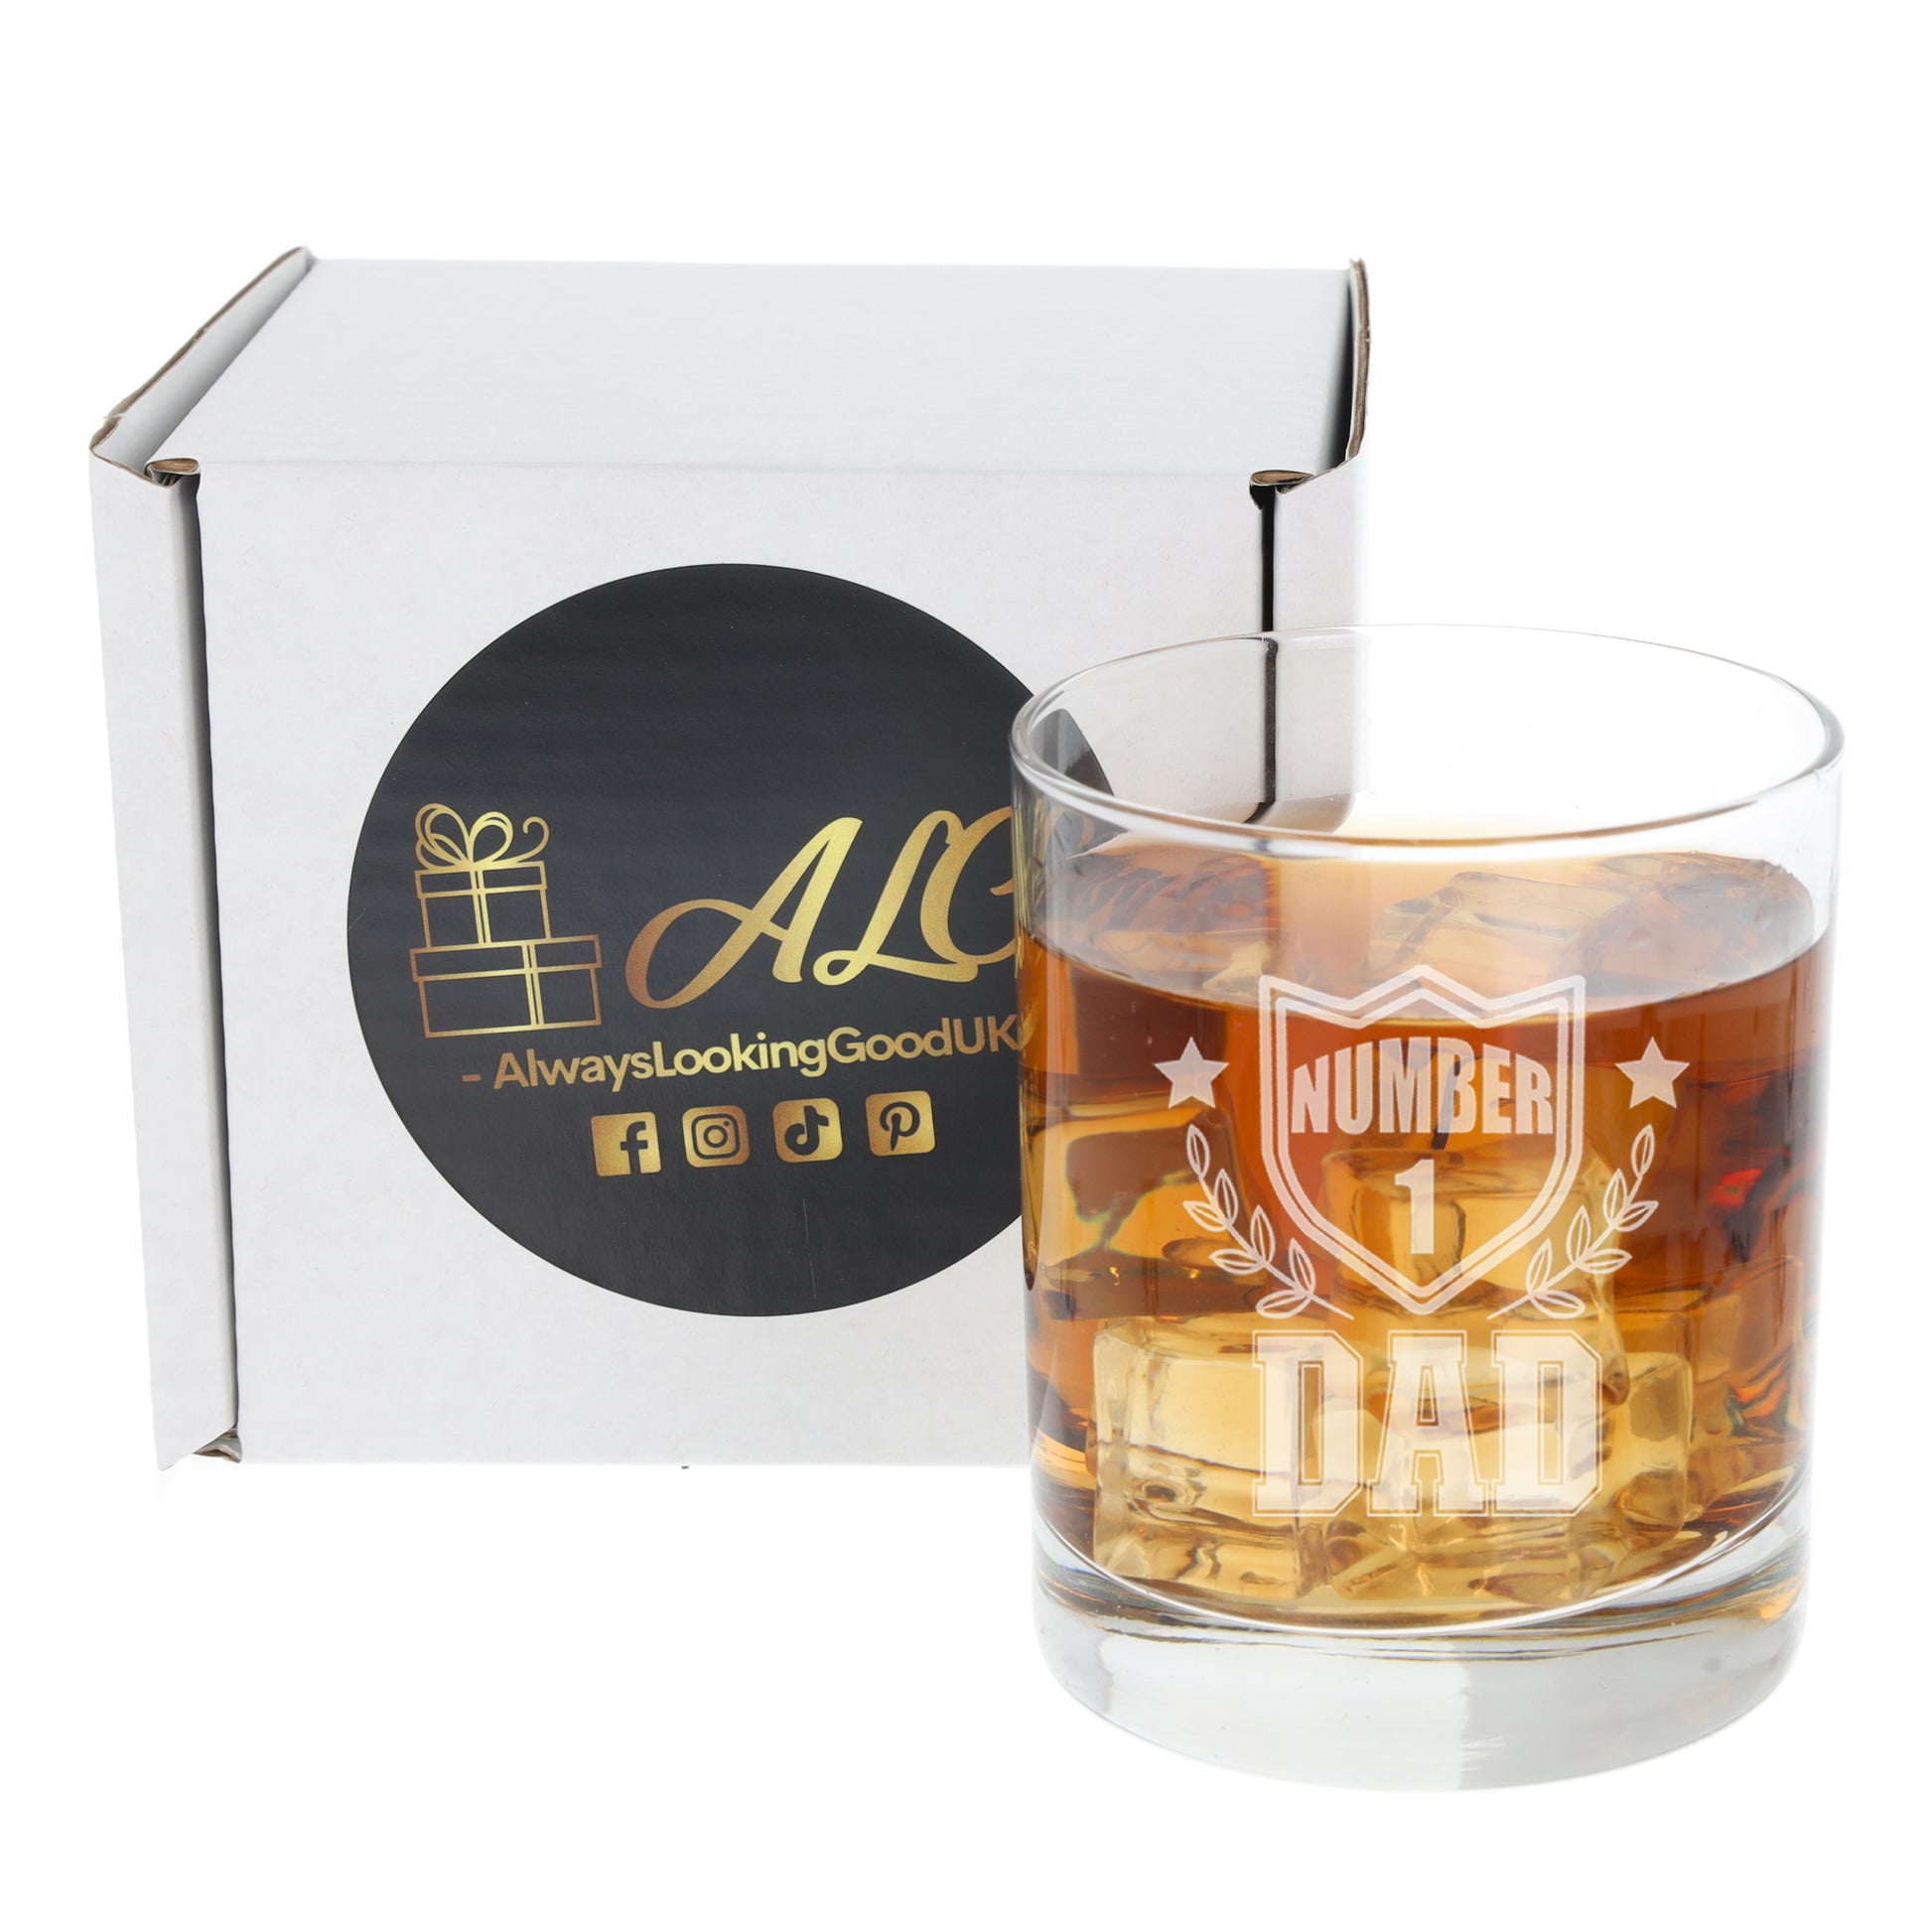 Engraved "Number 1 Dad" Whisky Glass and/or Coaster Set  - Always Looking Good - Glass Only  